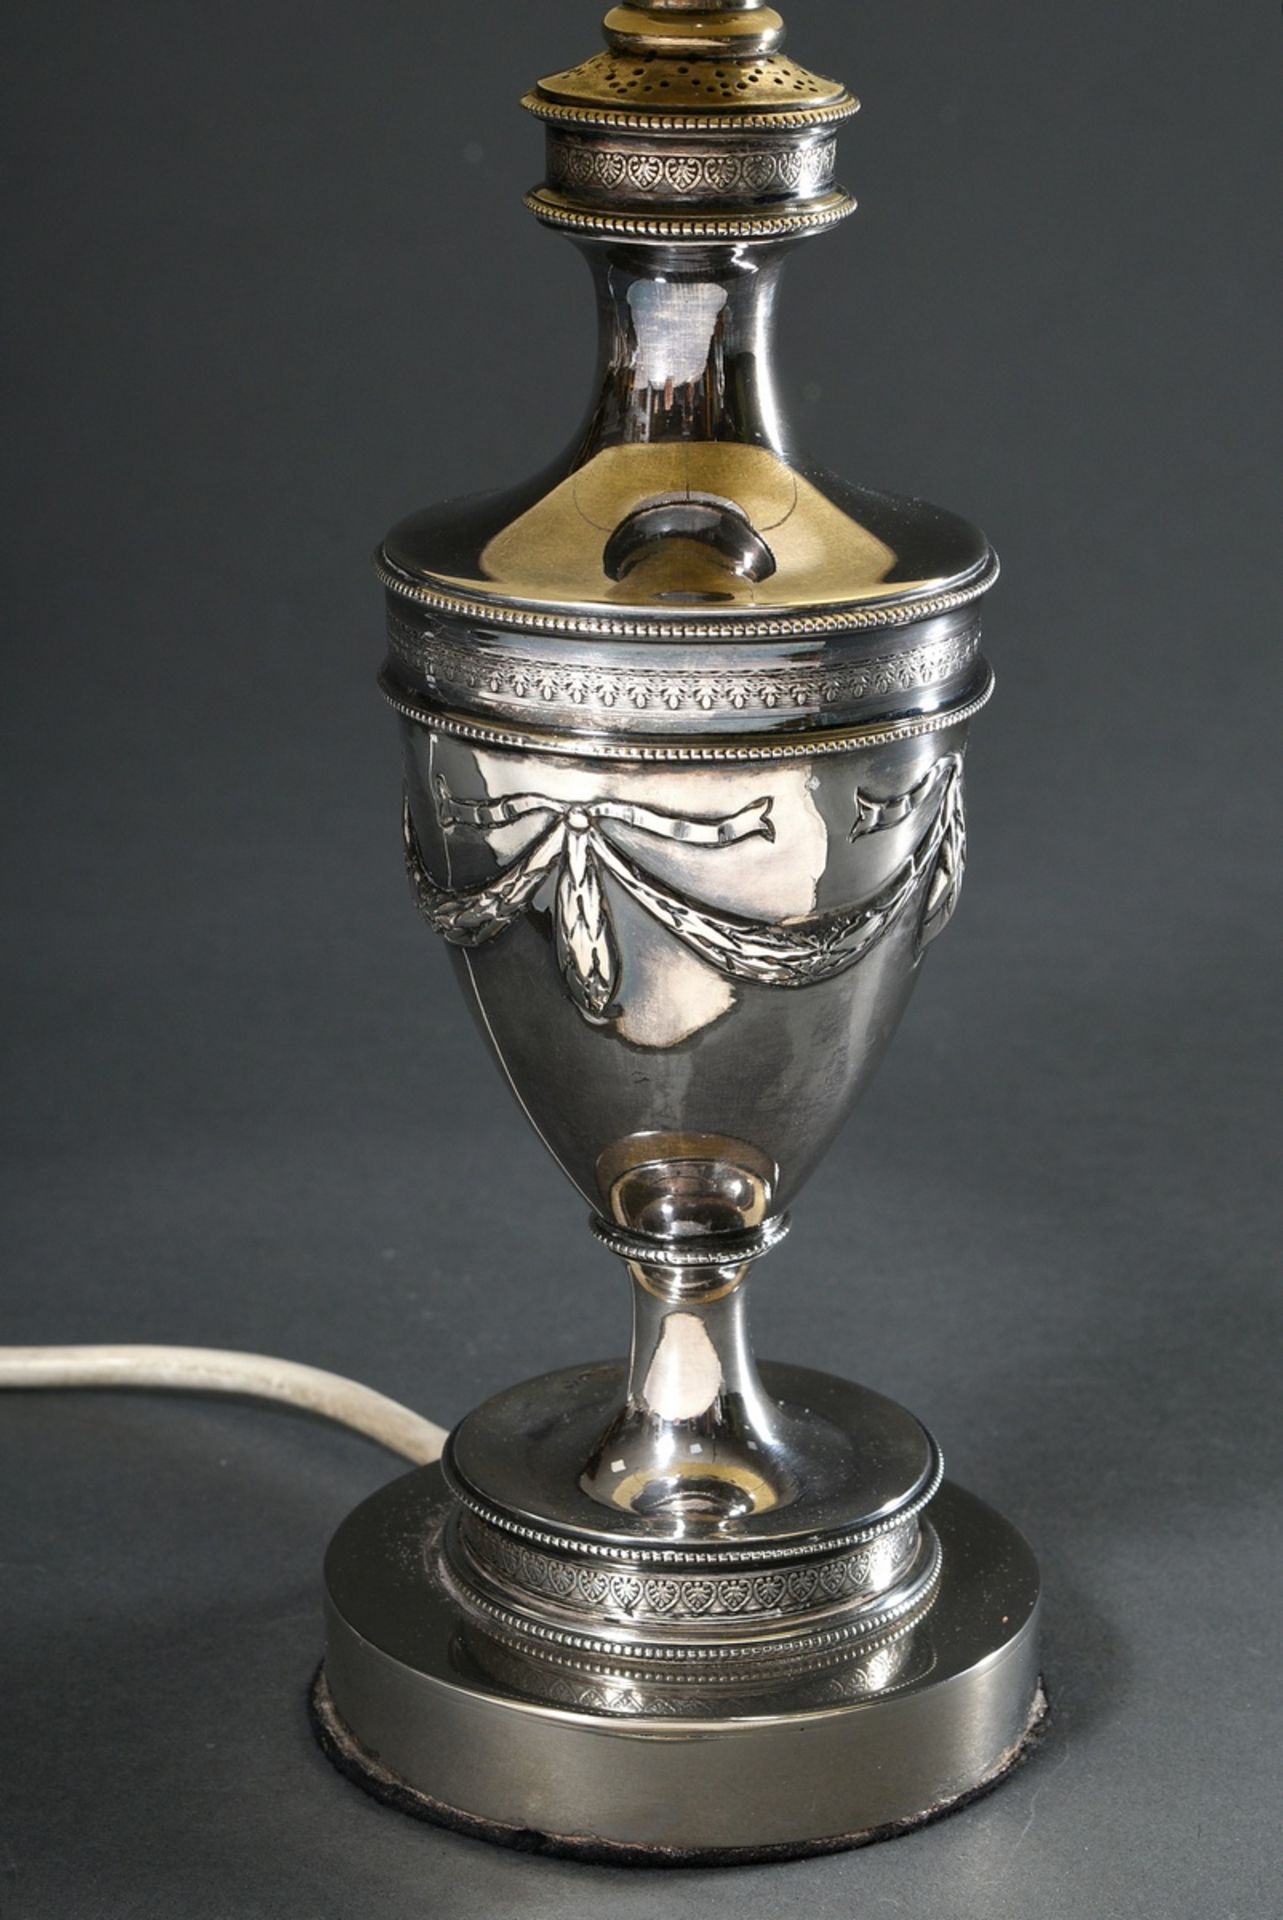 Table lamp with vase base in Louis XVI style, maker's mark indistinct, around 1900, silver 800 (fil - Image 2 of 4